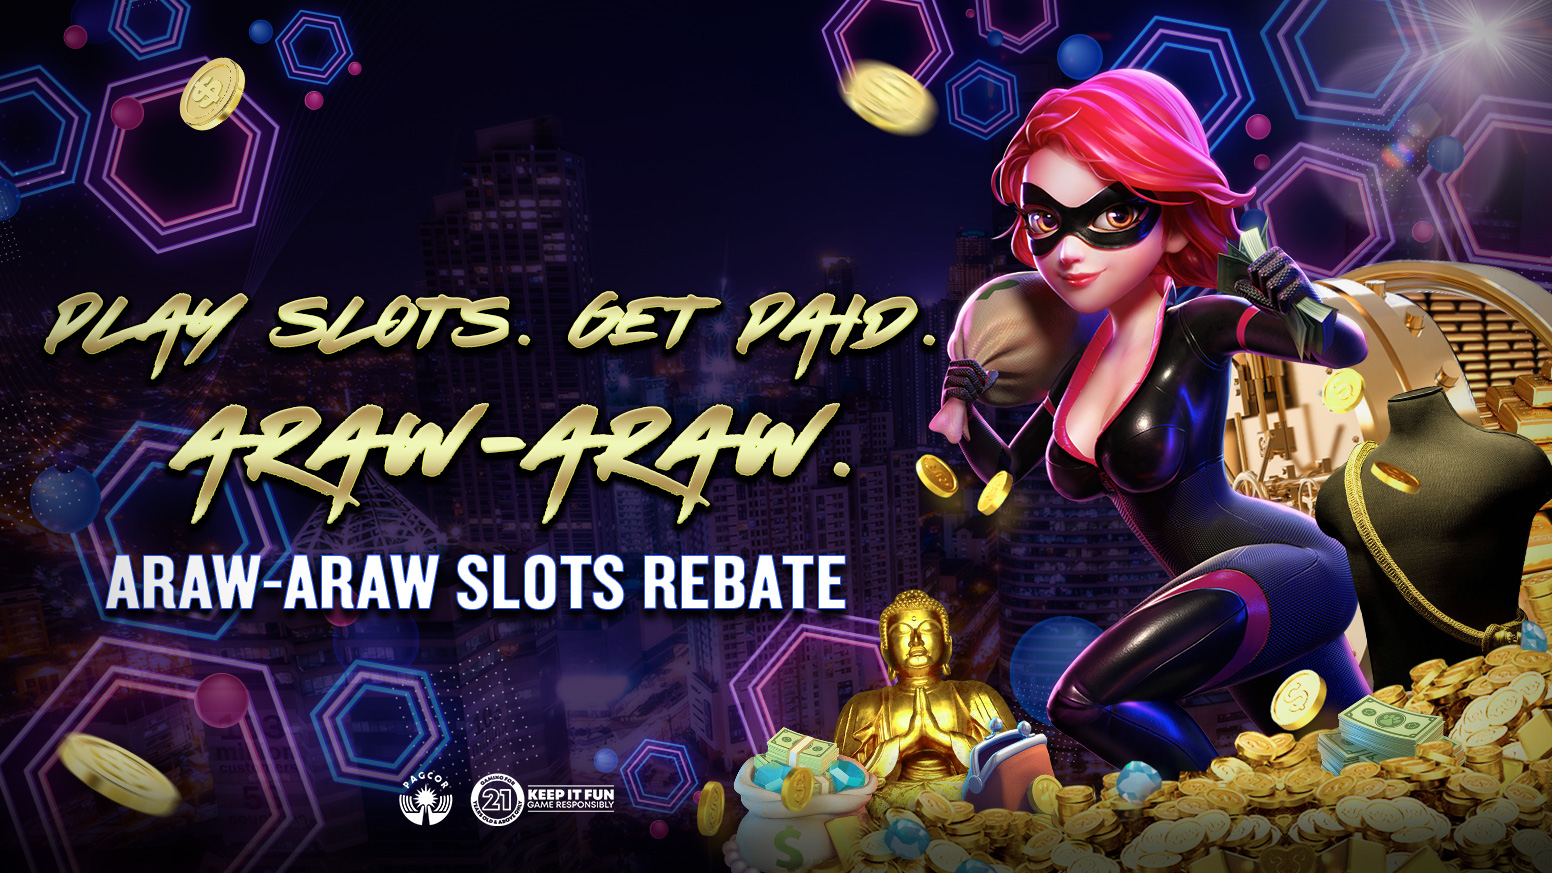 Whether you win or lose on your slots play, you’ll get  a rebate on your slots wagering back in your account on the following day.